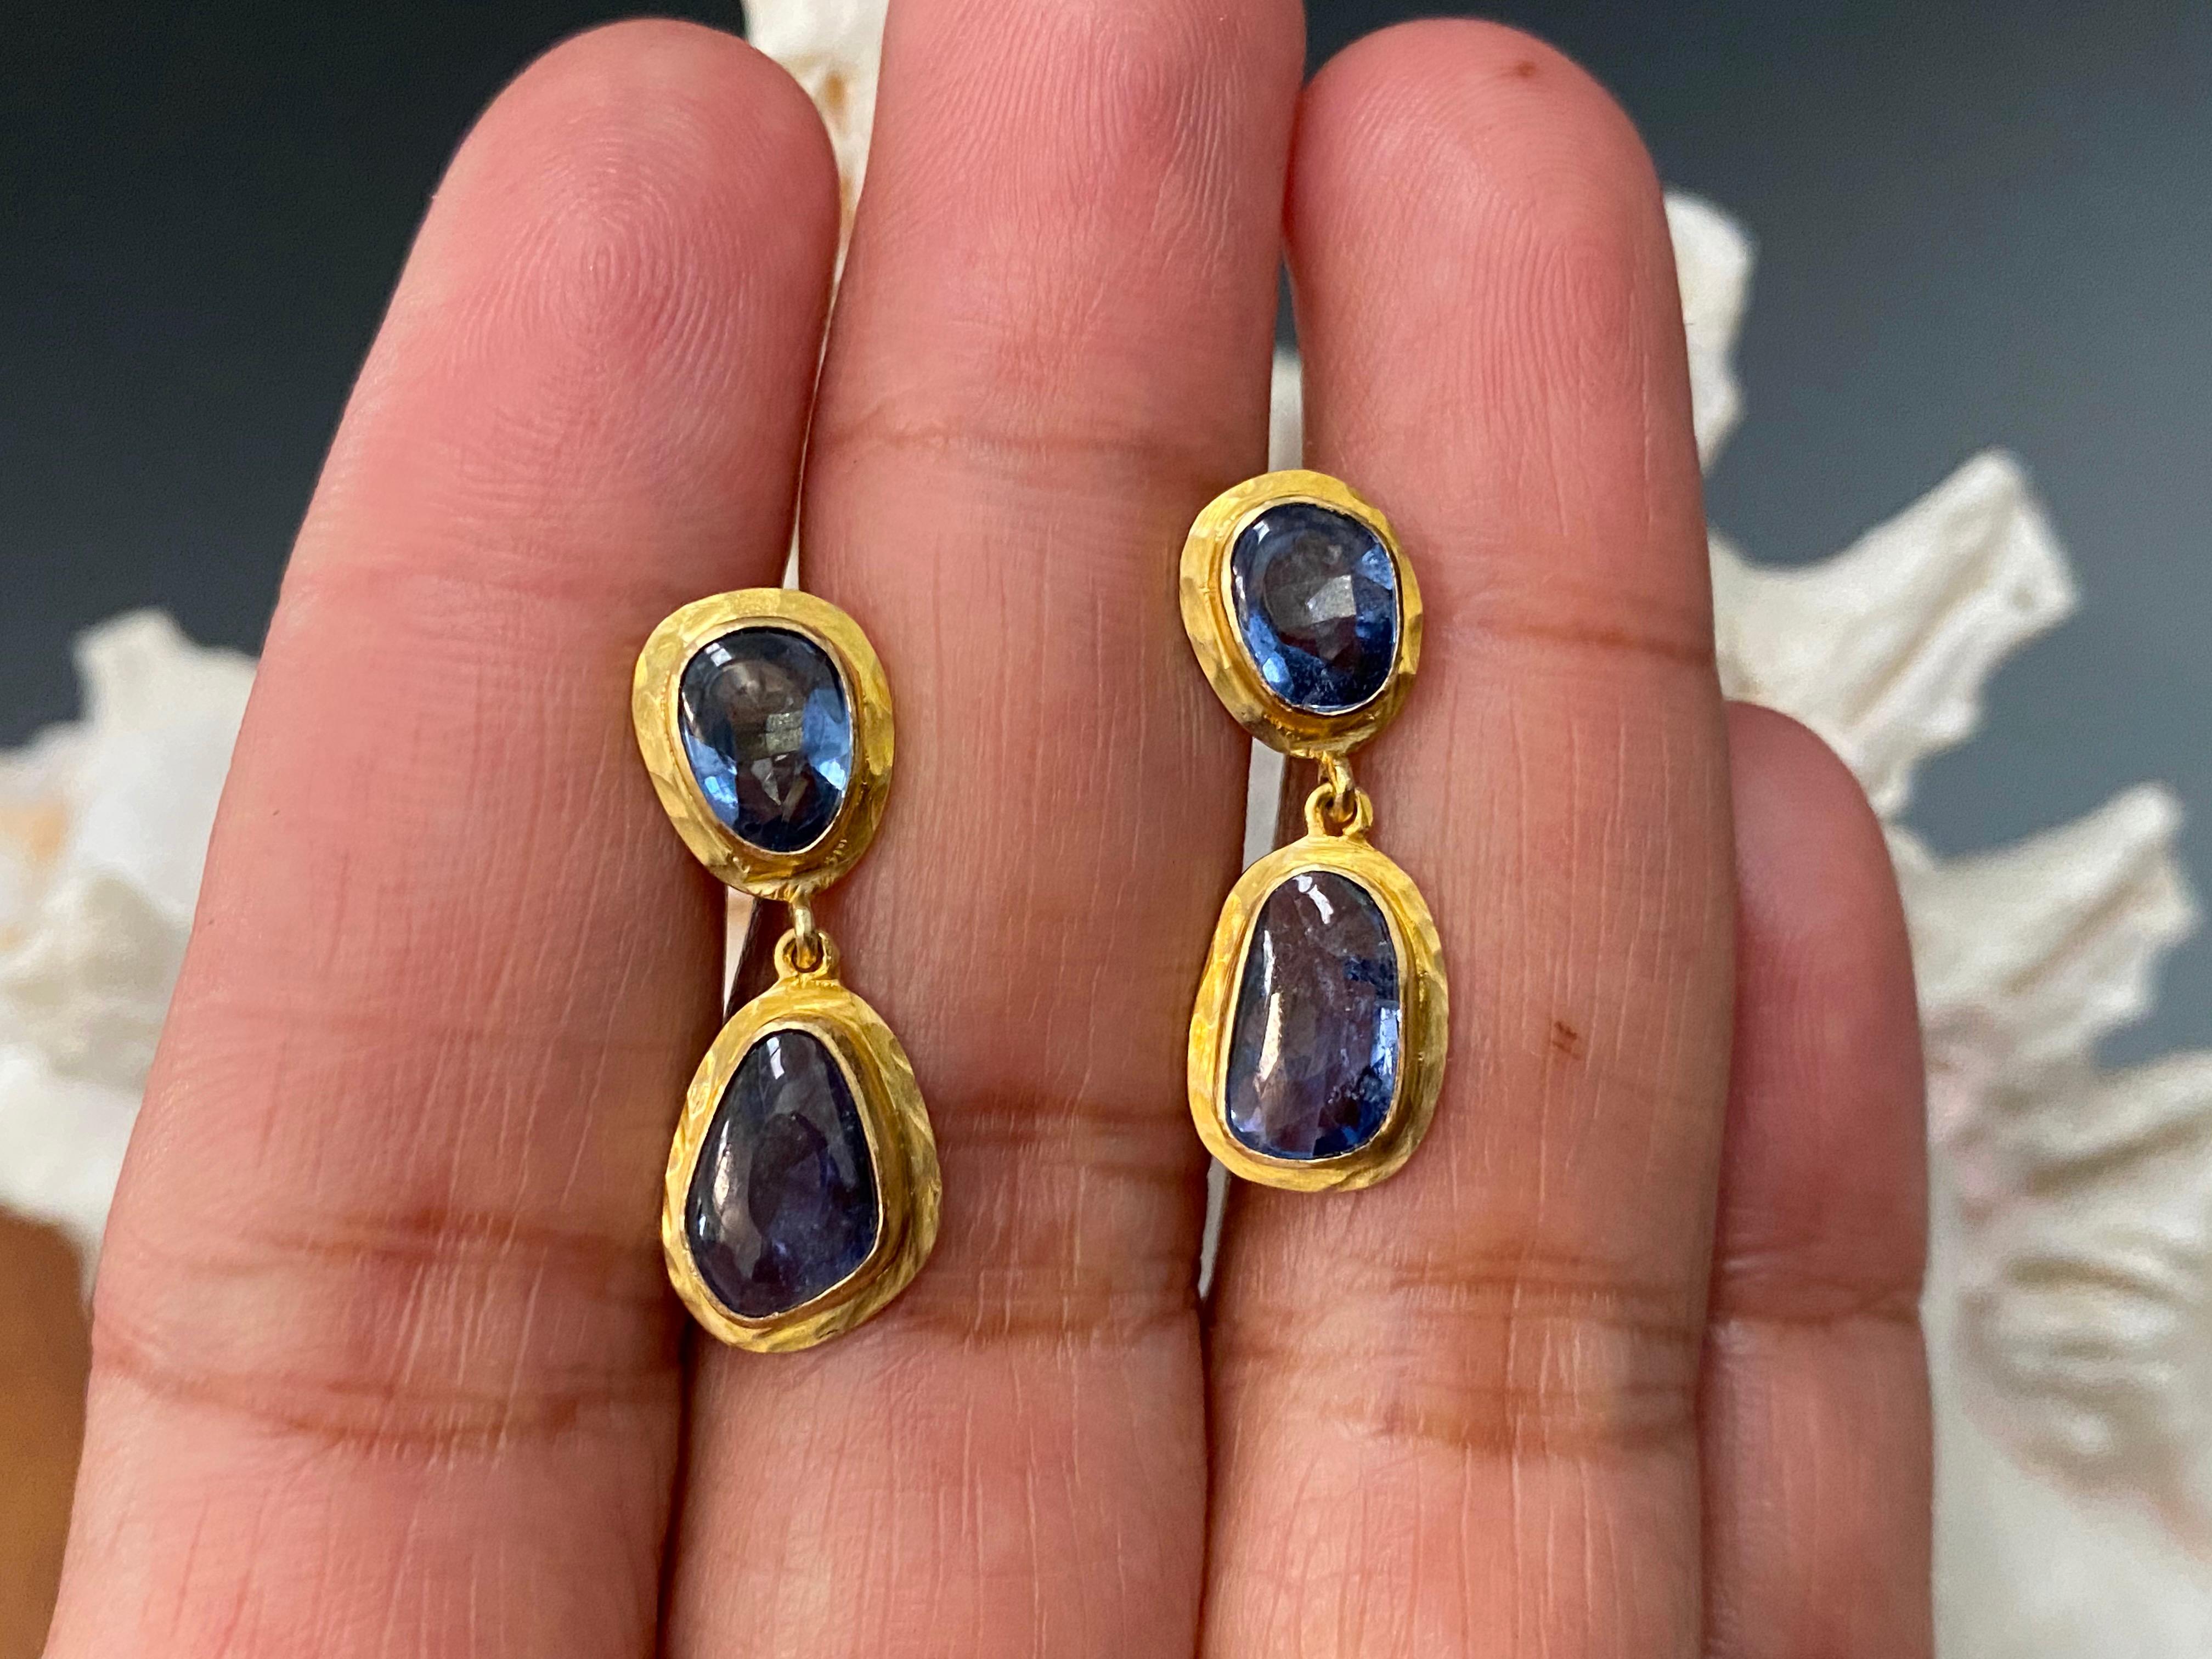 Four mixed organic shape buff top Blue Sapphires are combined into a simple handcrafted hammered bezel setting.  Subtle and fun.  4.7 Carats
Total Weight 3.78 gram
Length 25mm